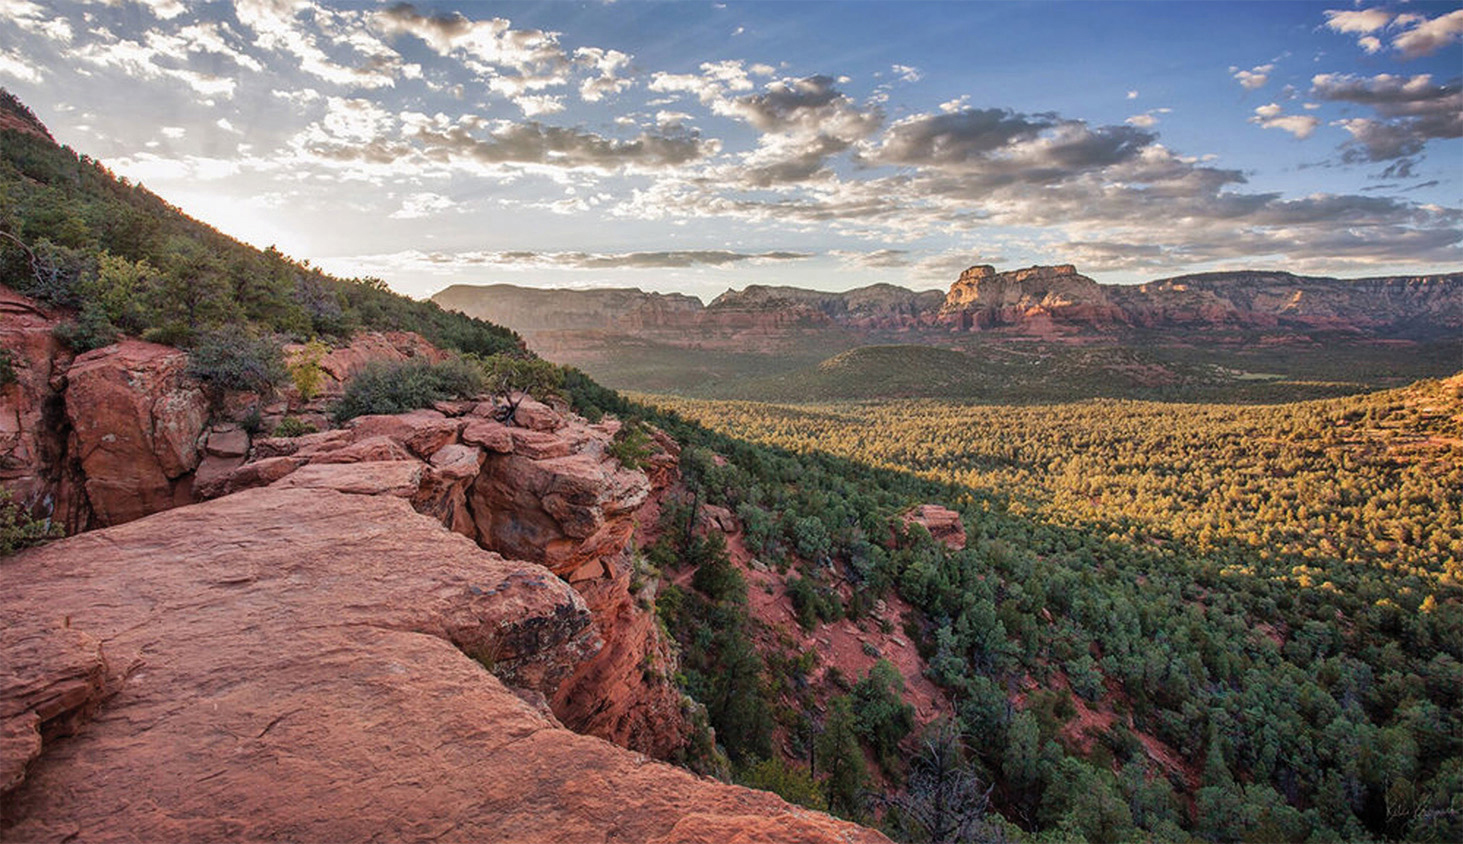 A beautiful example of Sedona scenery by Kelli Klymenko, featured presenter for the May Camera Club meeting.